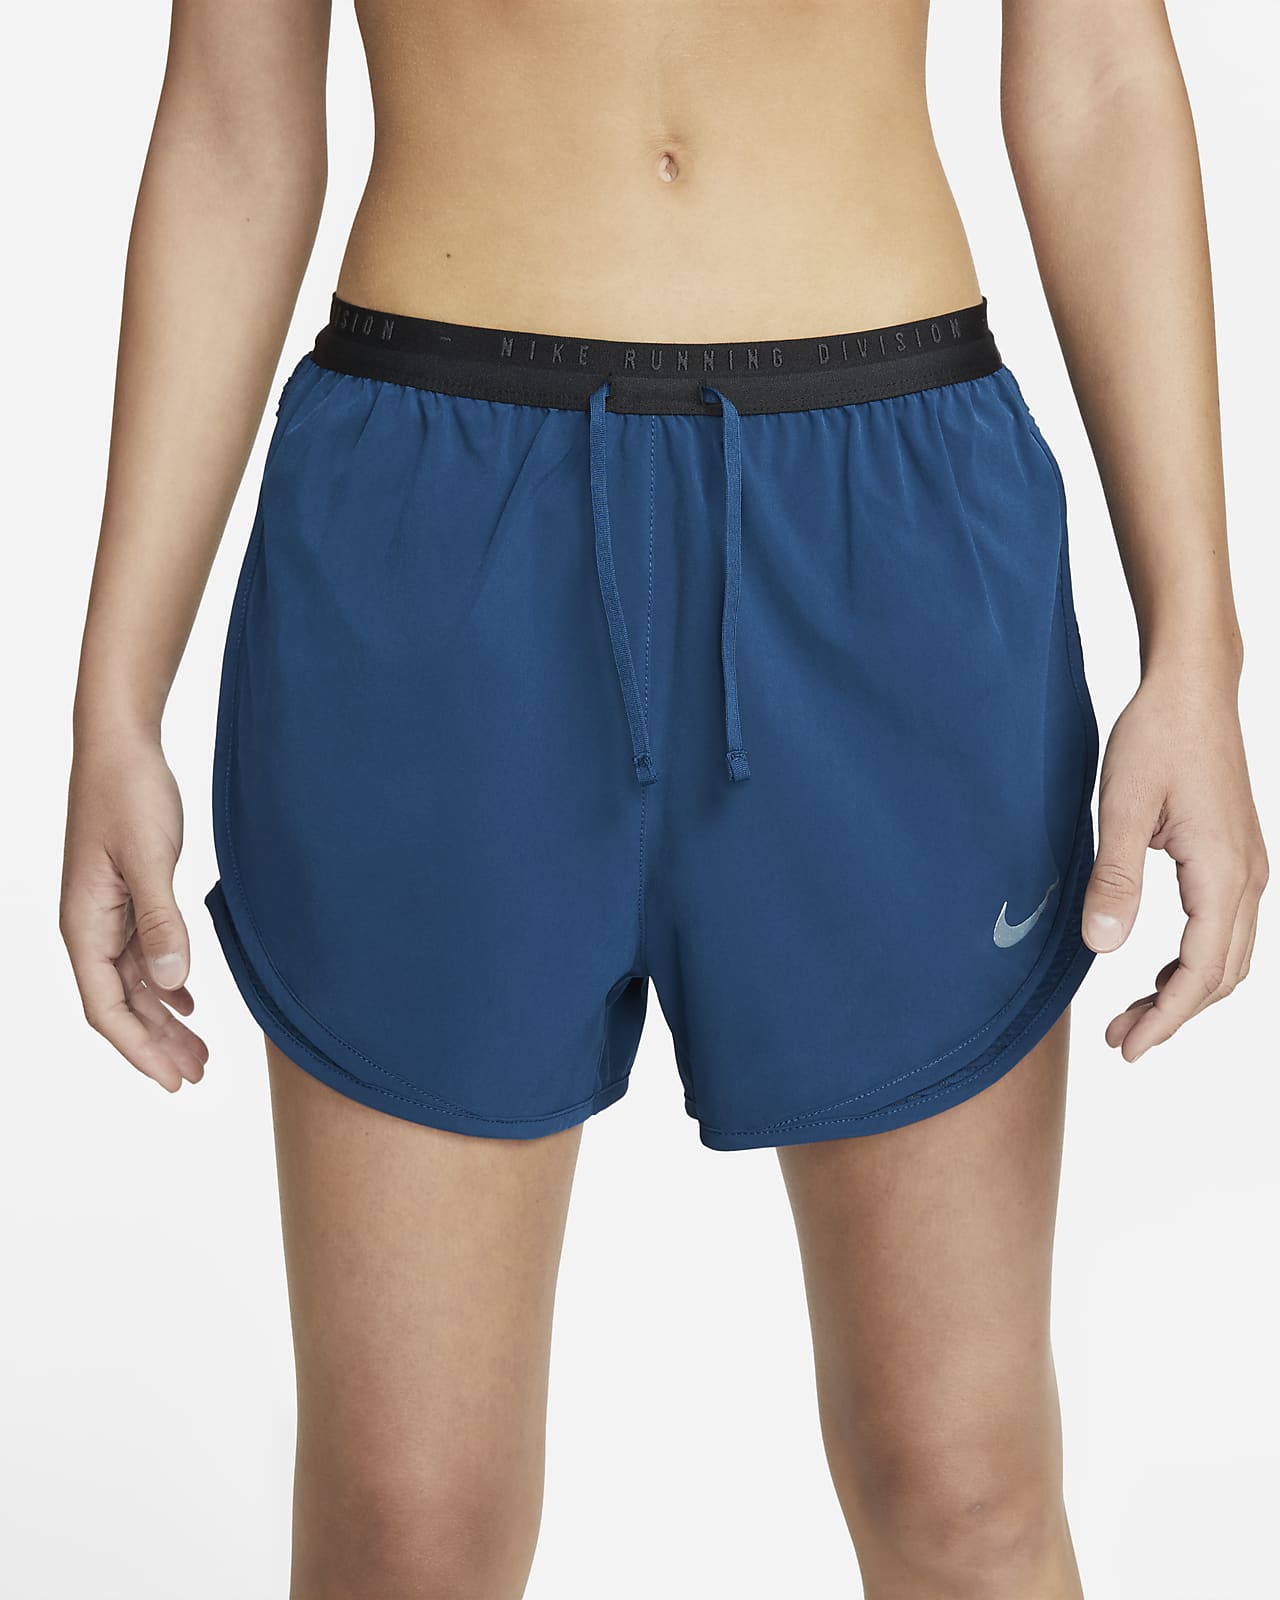 dri fit run division tempo luxe womens running shorts FhjVmm